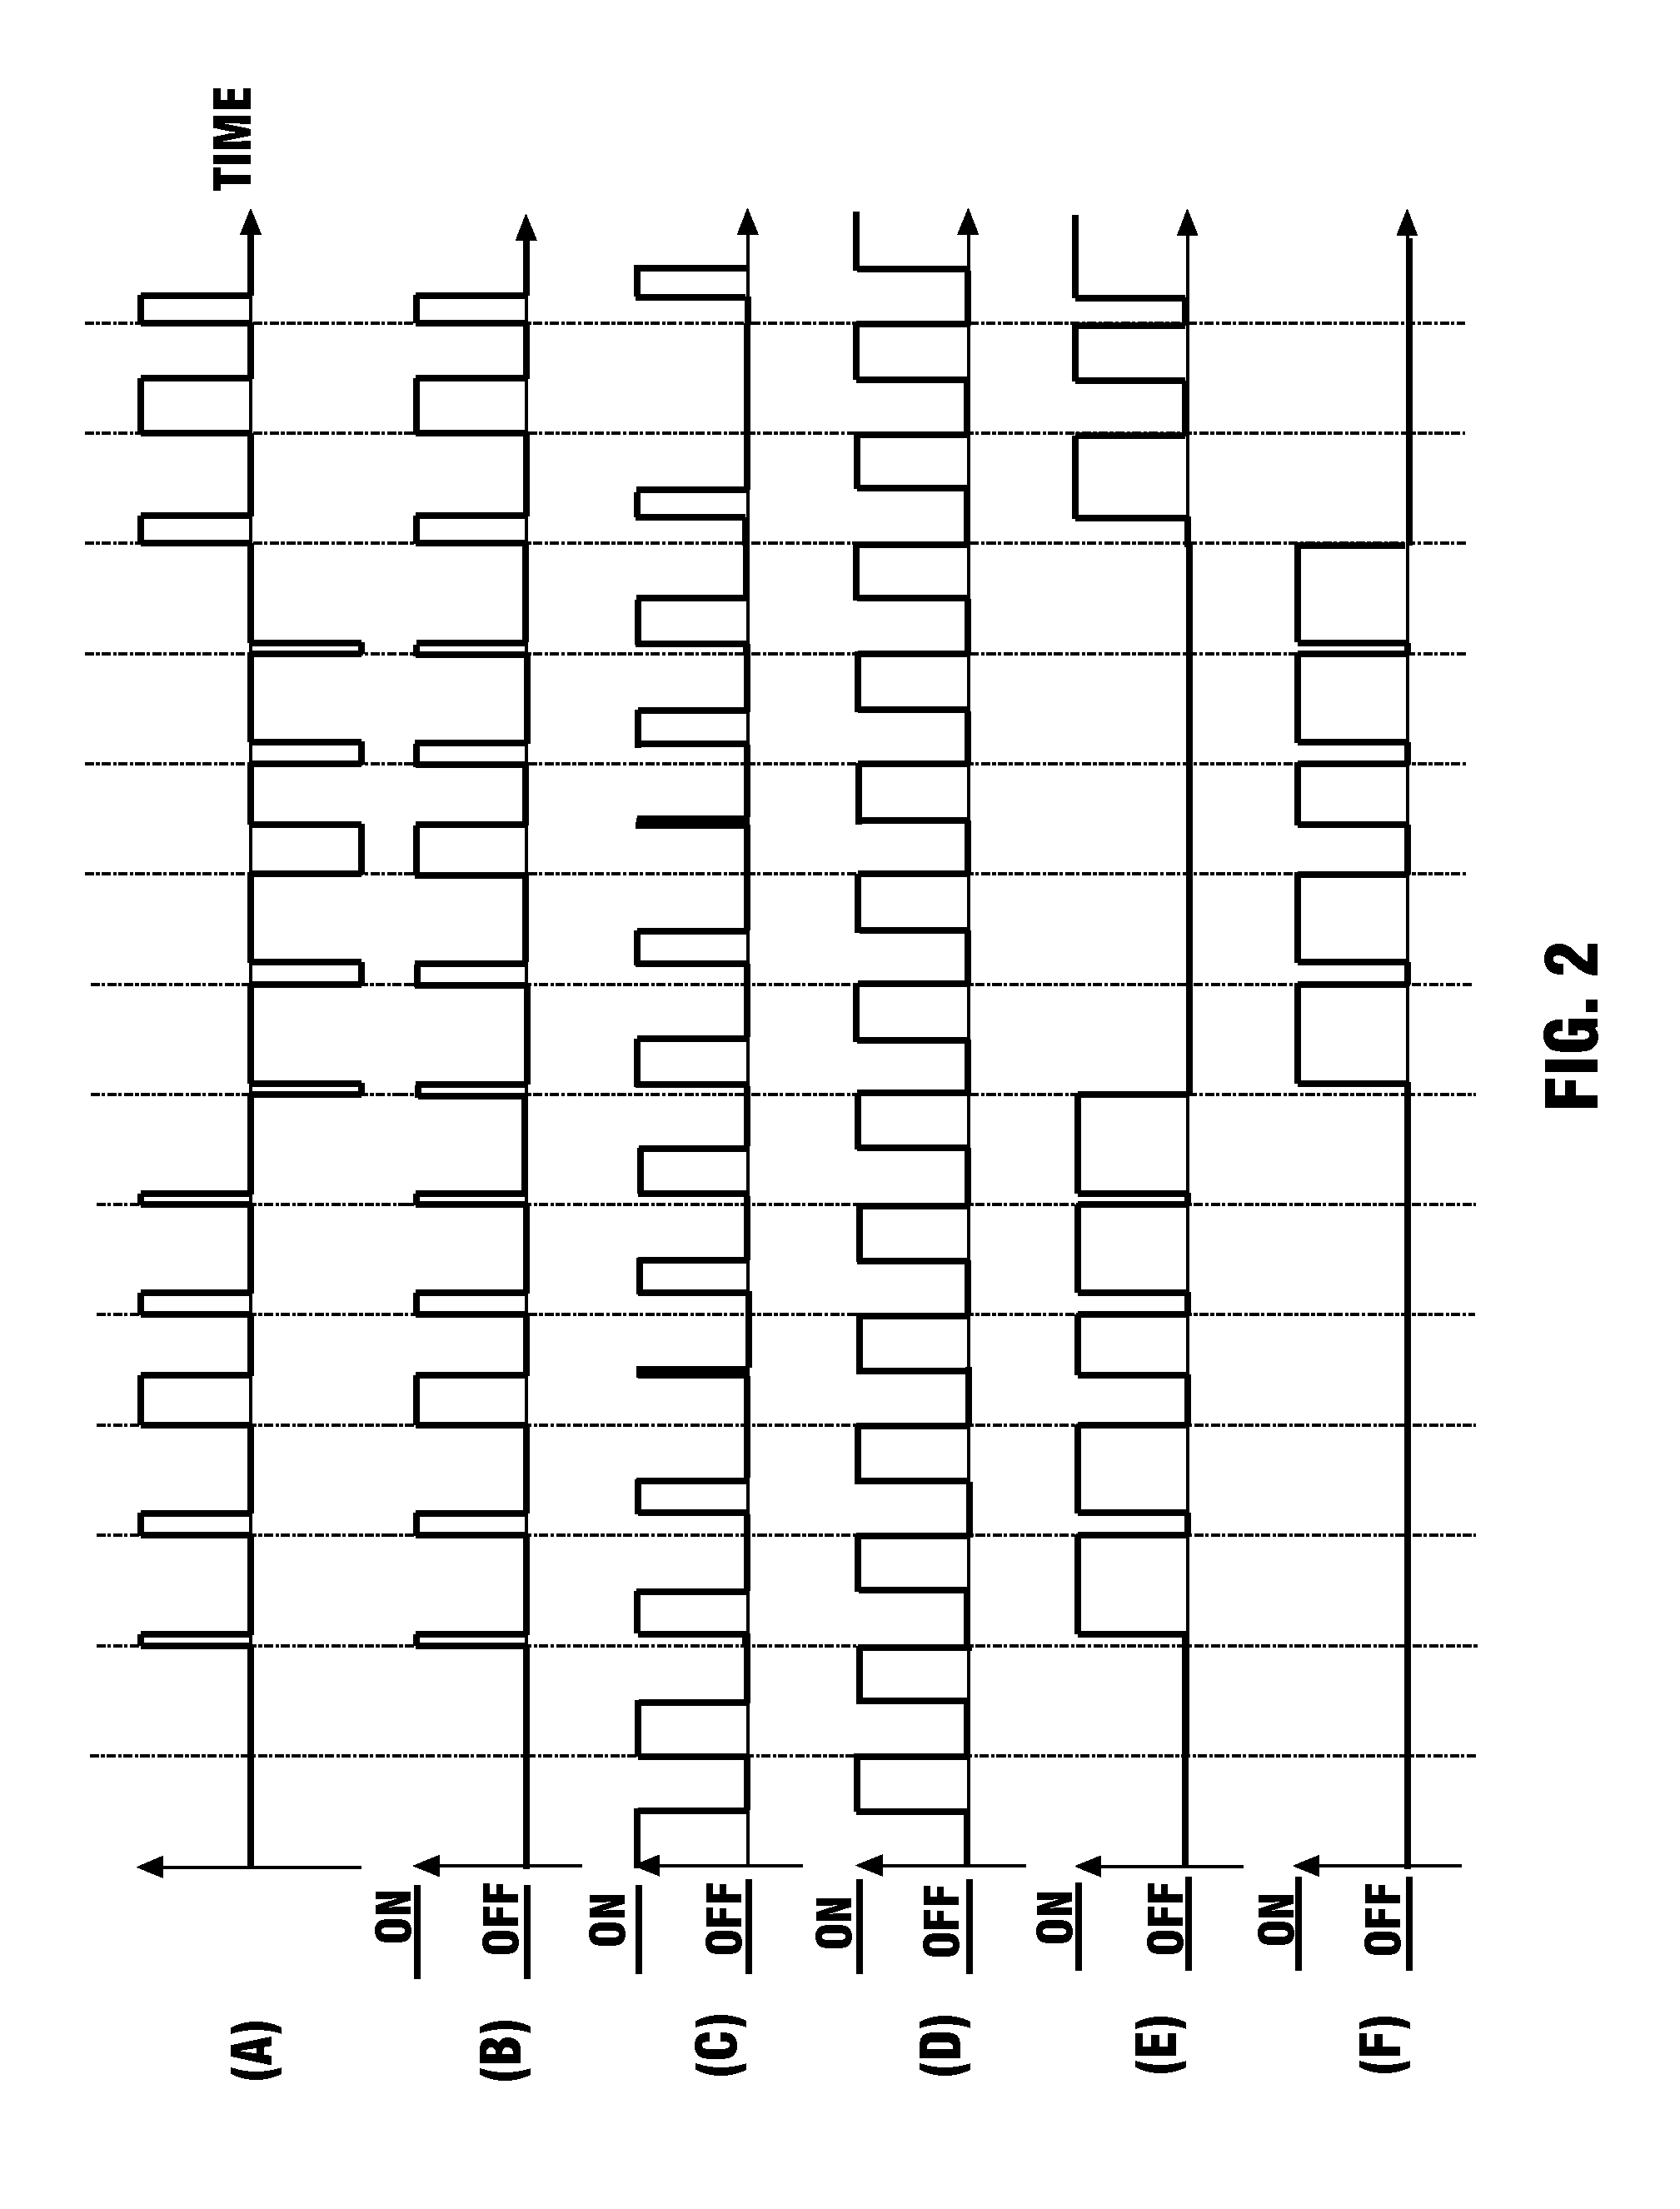 Switching amplifier using capacitor for transmitting energy